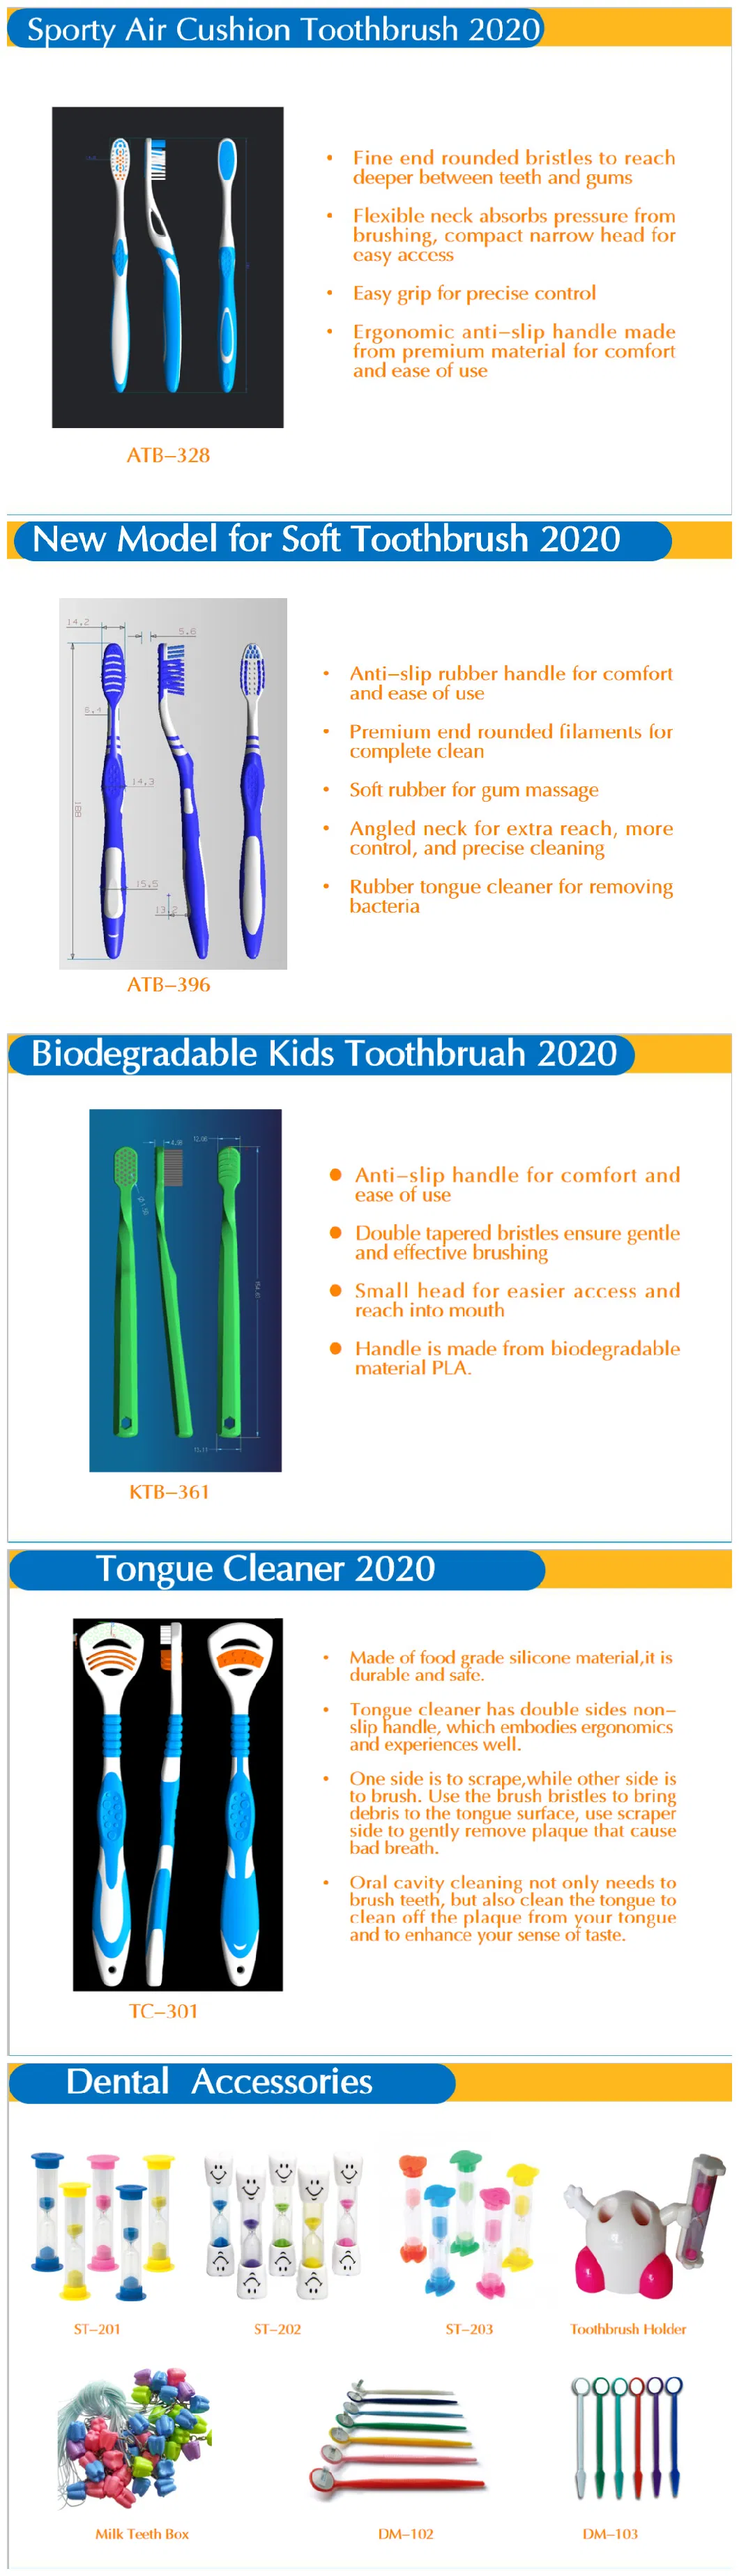 Atb396-1 New Style Super Soft Adult Toothbrush